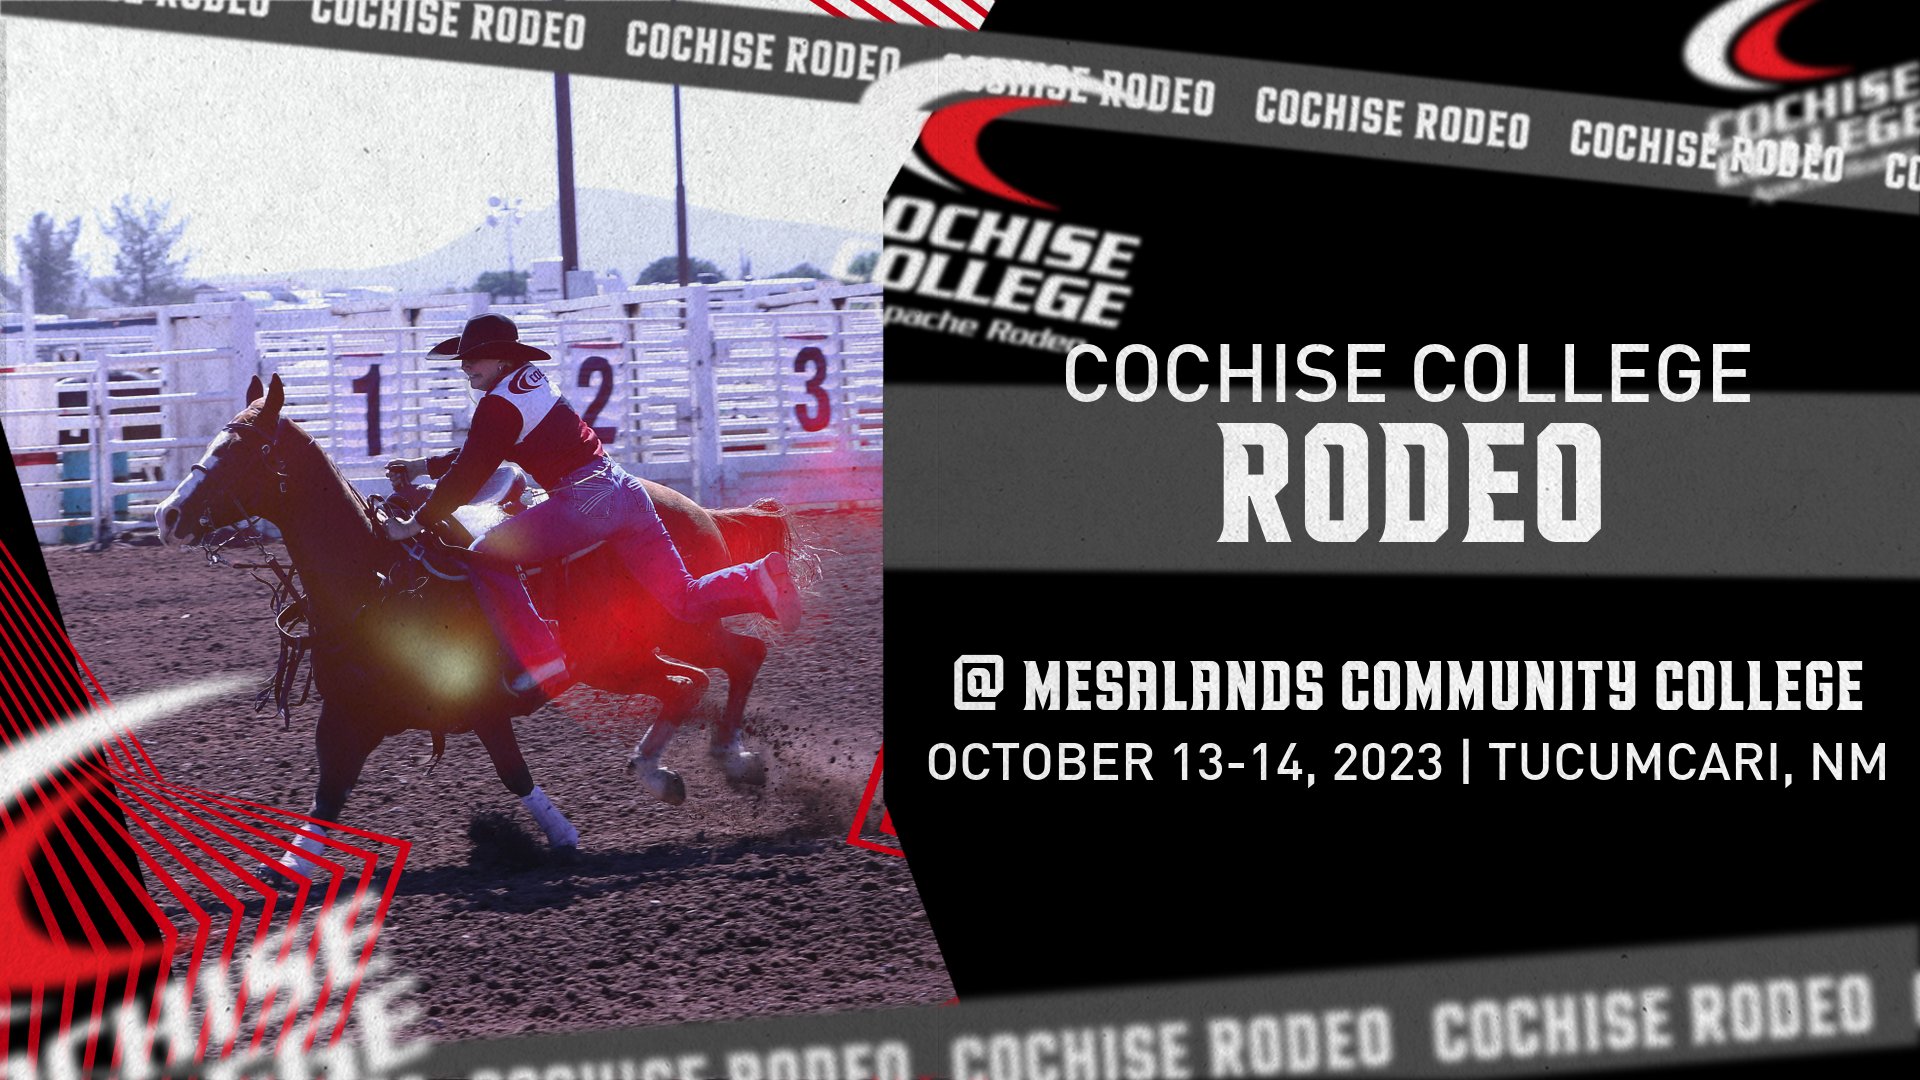 Cochise Rodeo